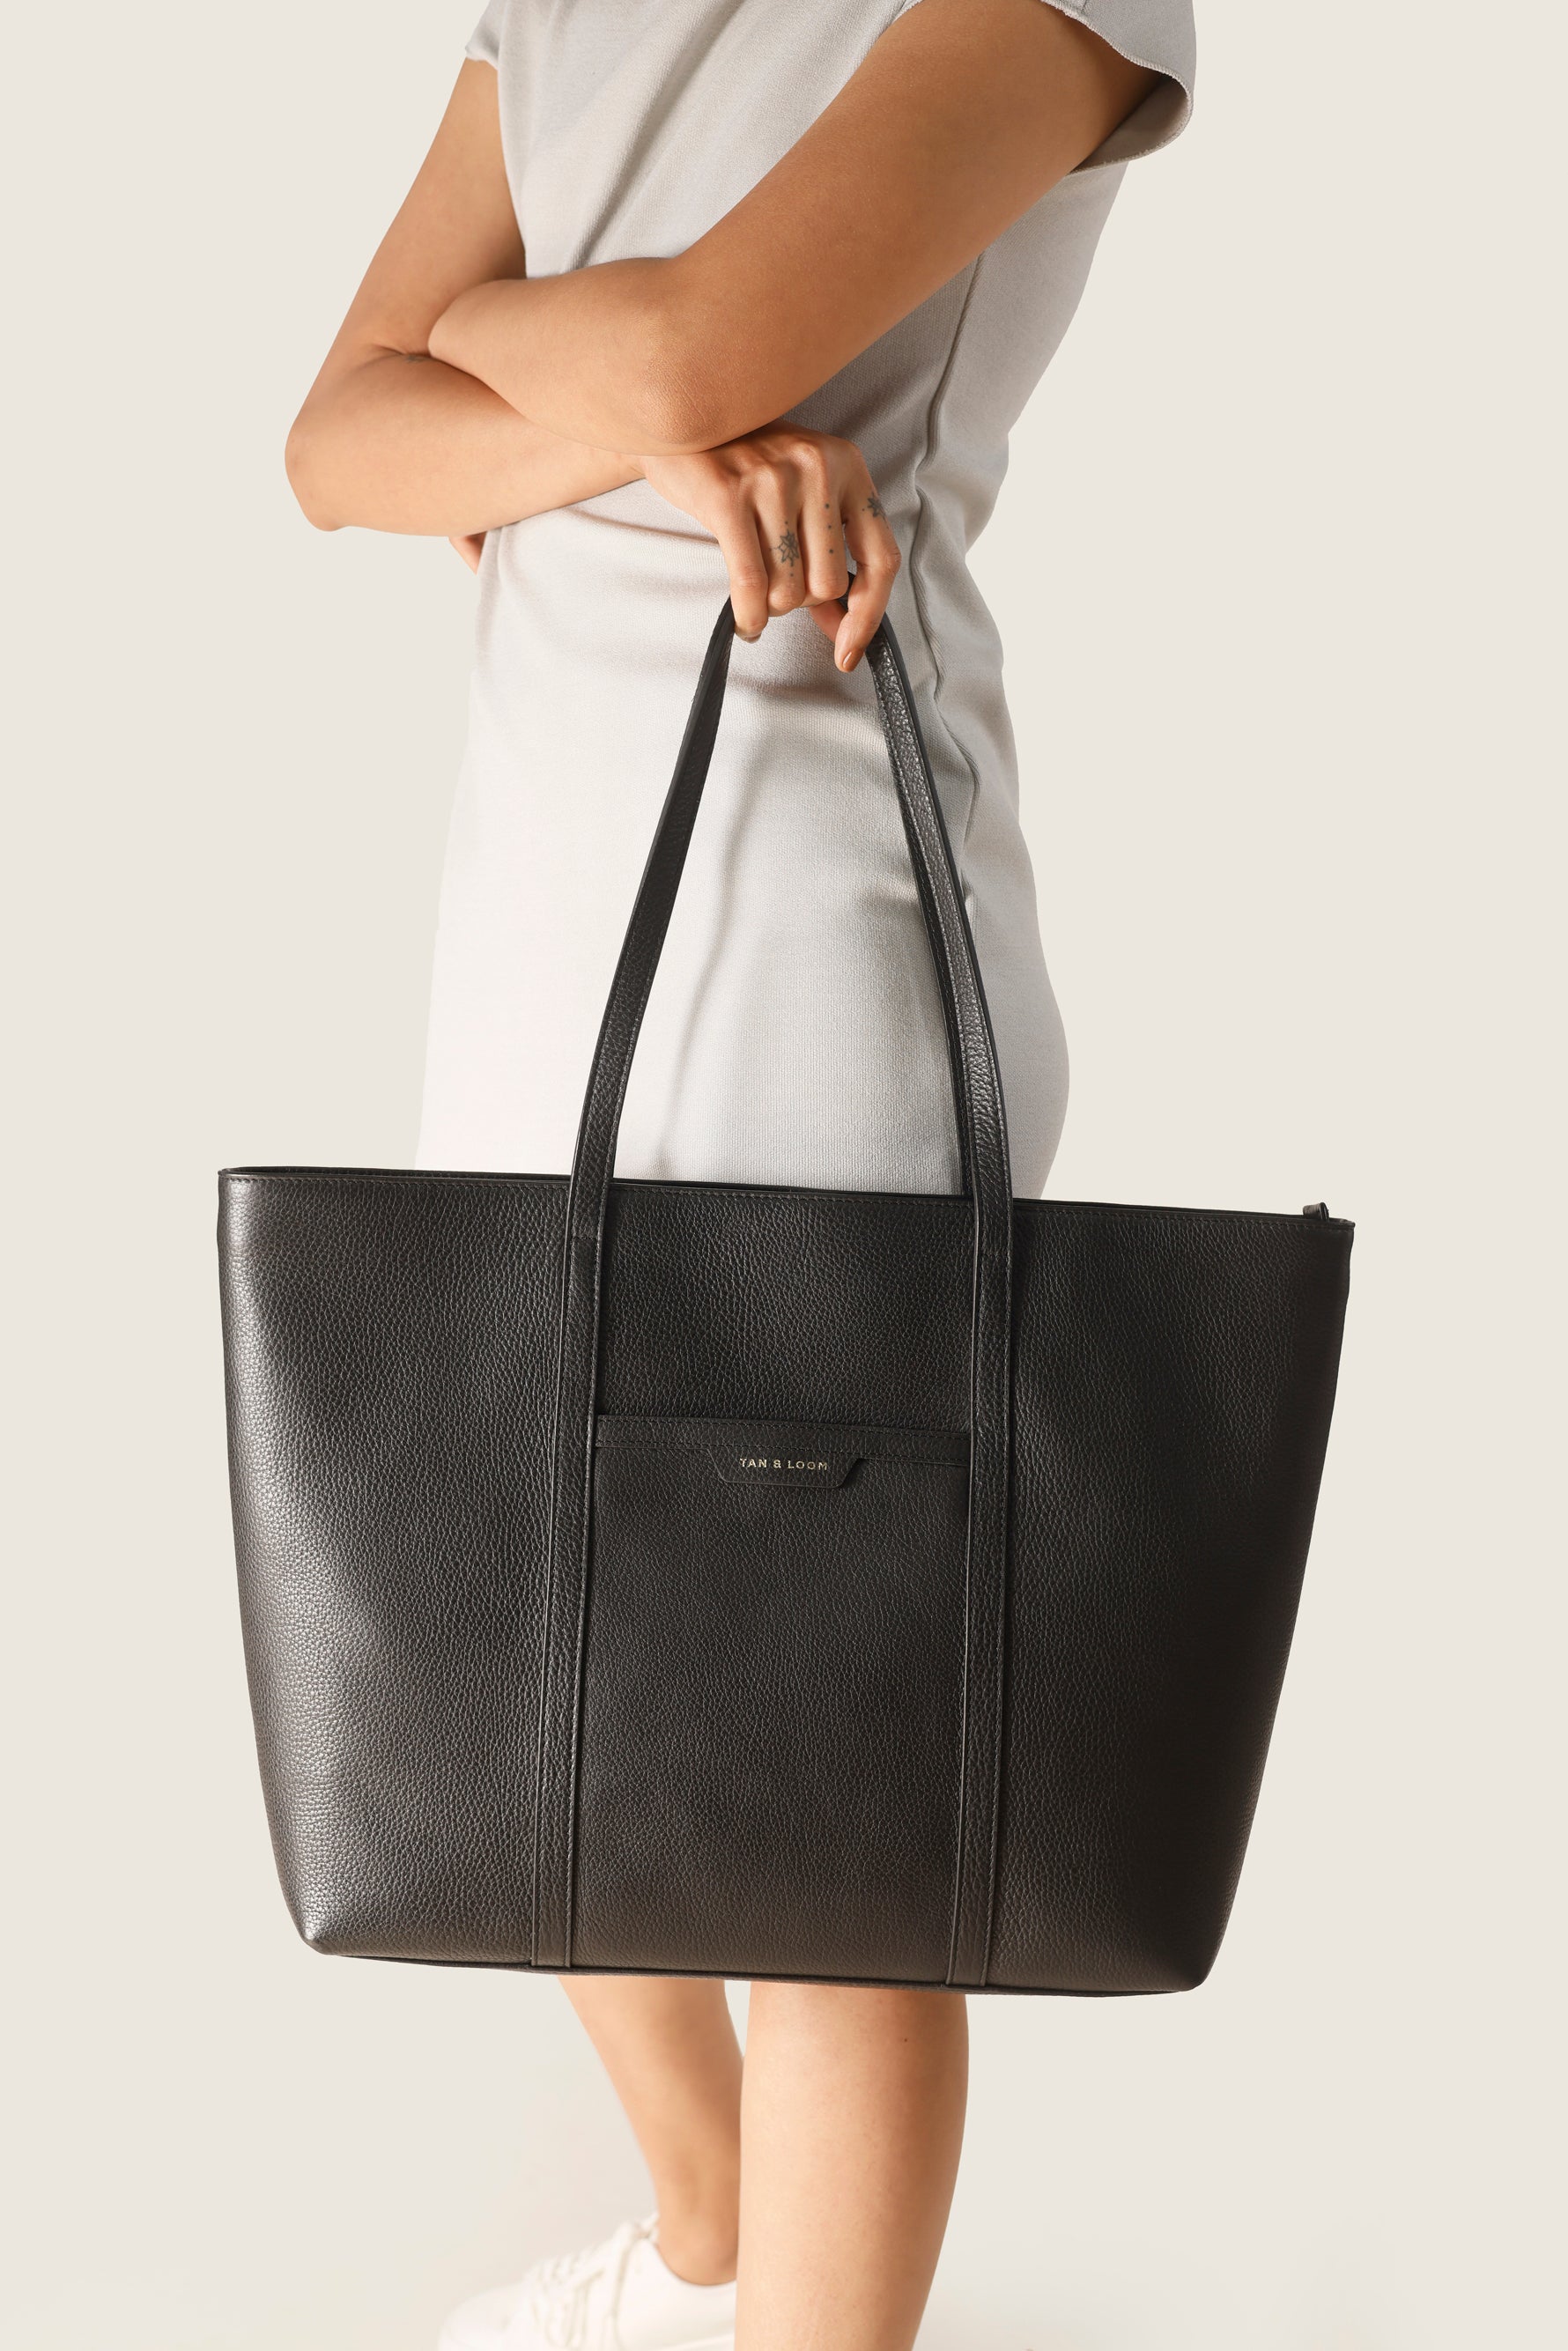 Handcrafted genuine leather 365 days tote bag for women Classic Black